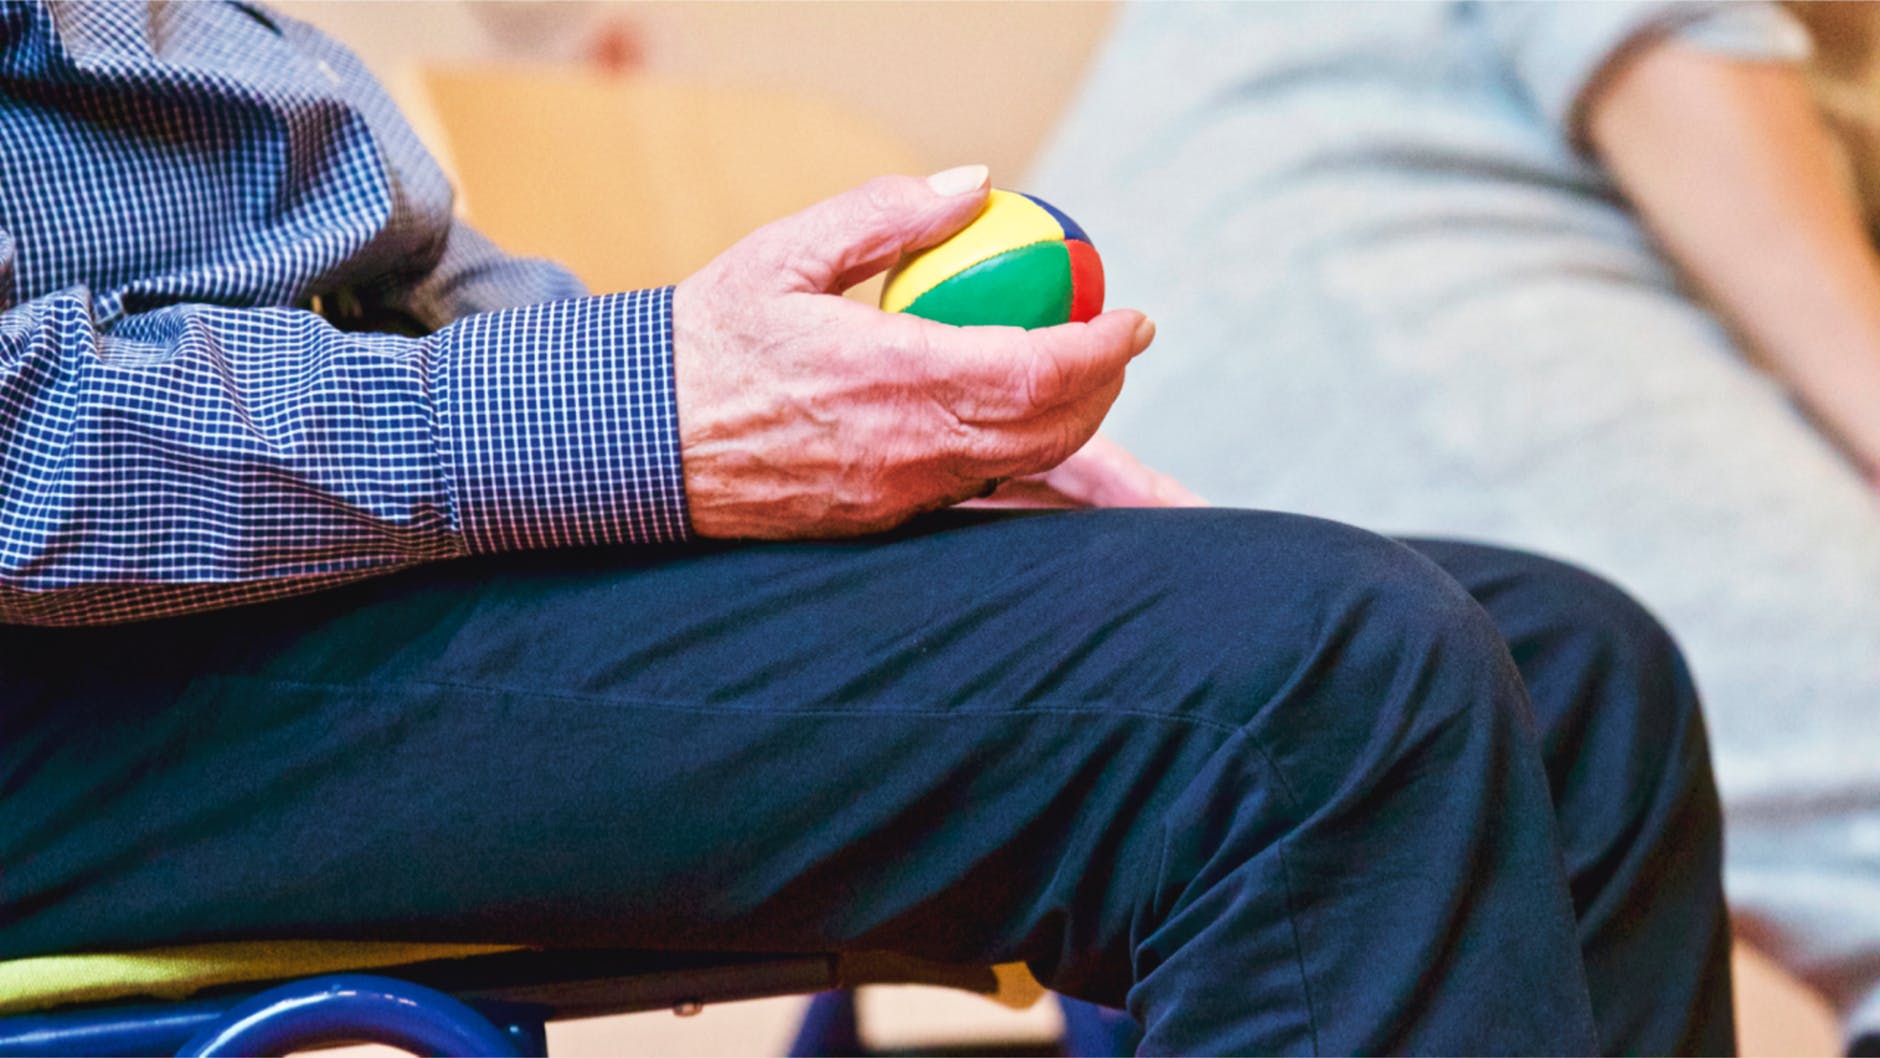 Seated Exercises For Older Adults